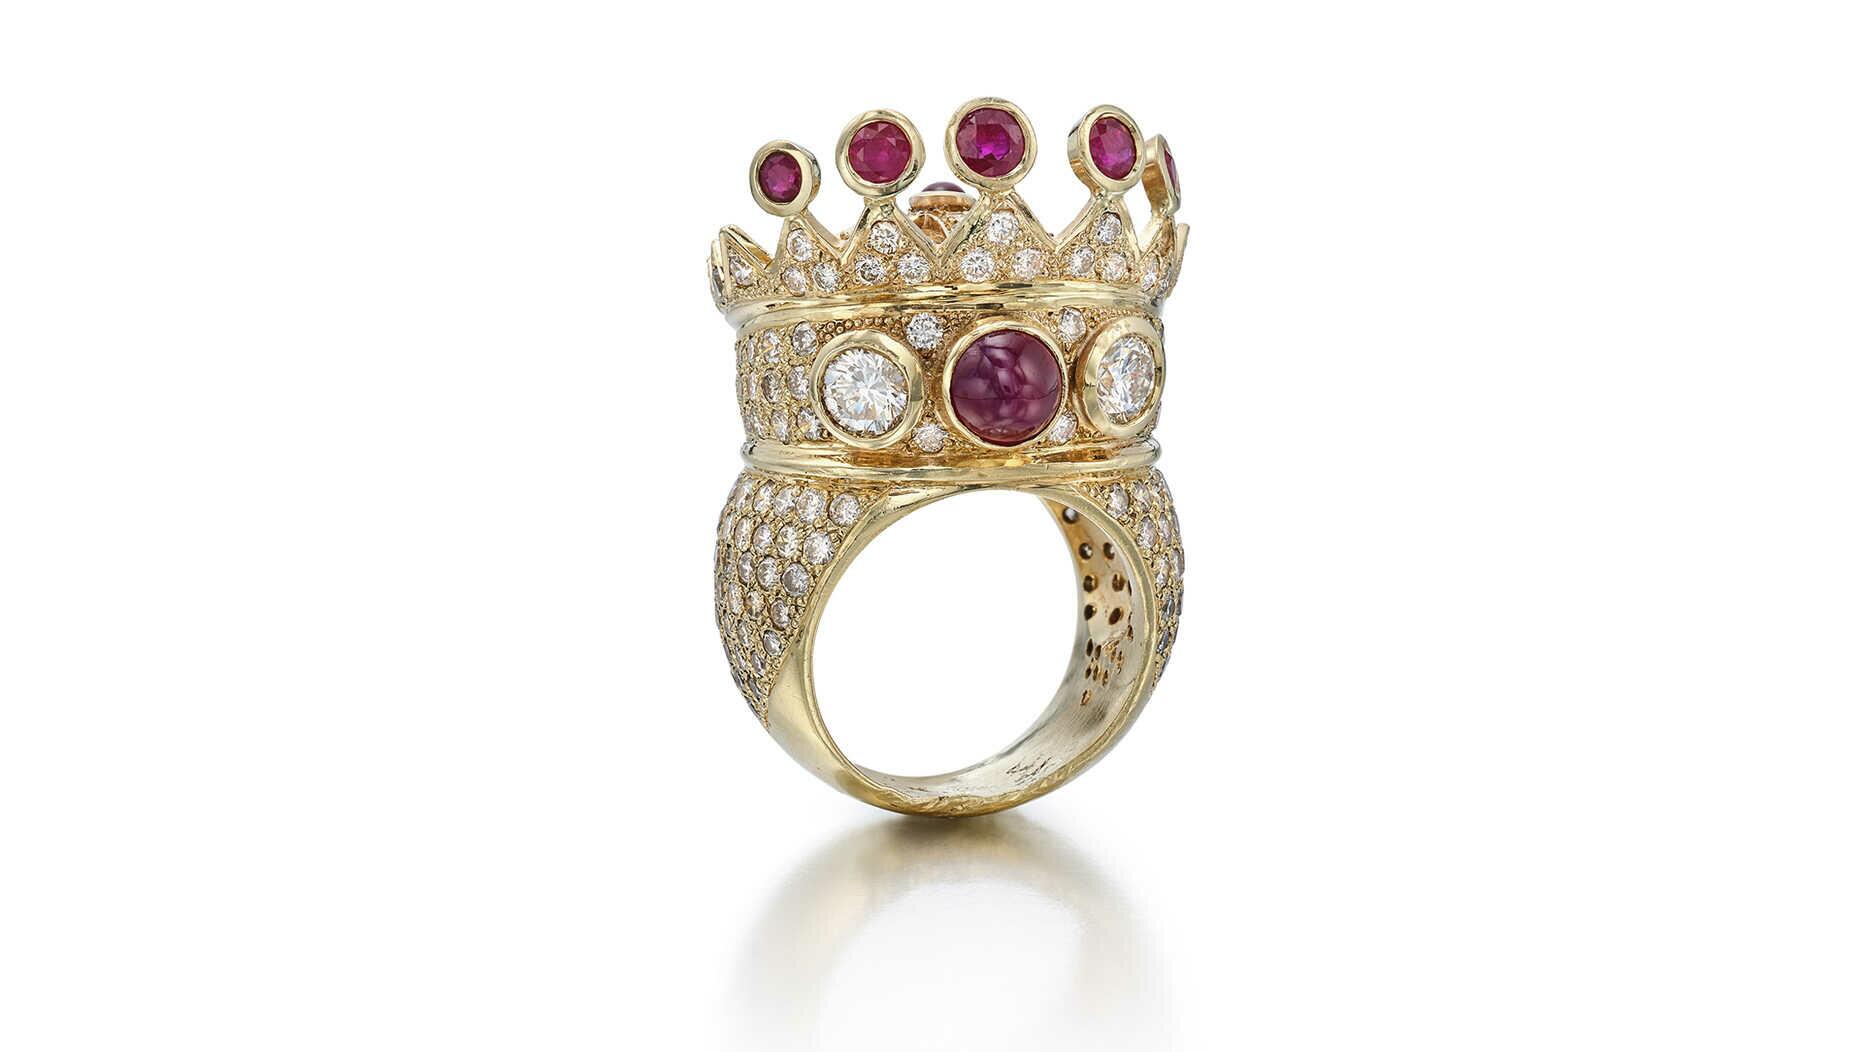 This Tupac Shakur gold, ruby and diamond crown ring sold for more than $1 million at Sotheby’s.  